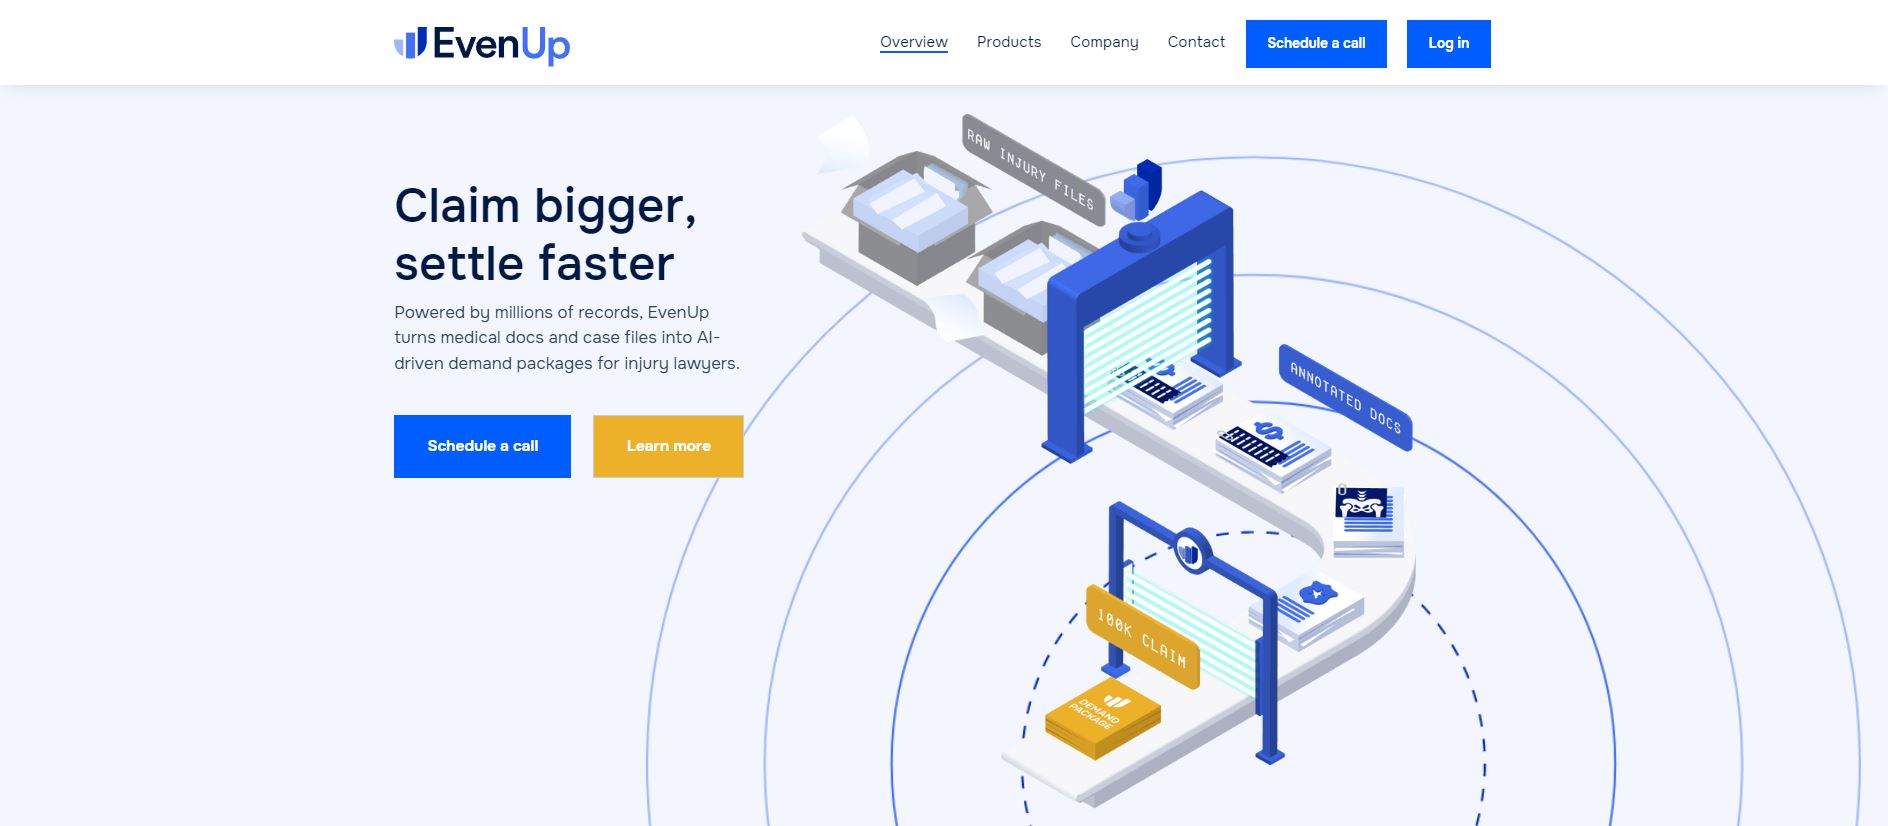 With a remarkable $50.5 million raised in their Series B funding round, EvenUp is making waves in the technology, information, and internet industry